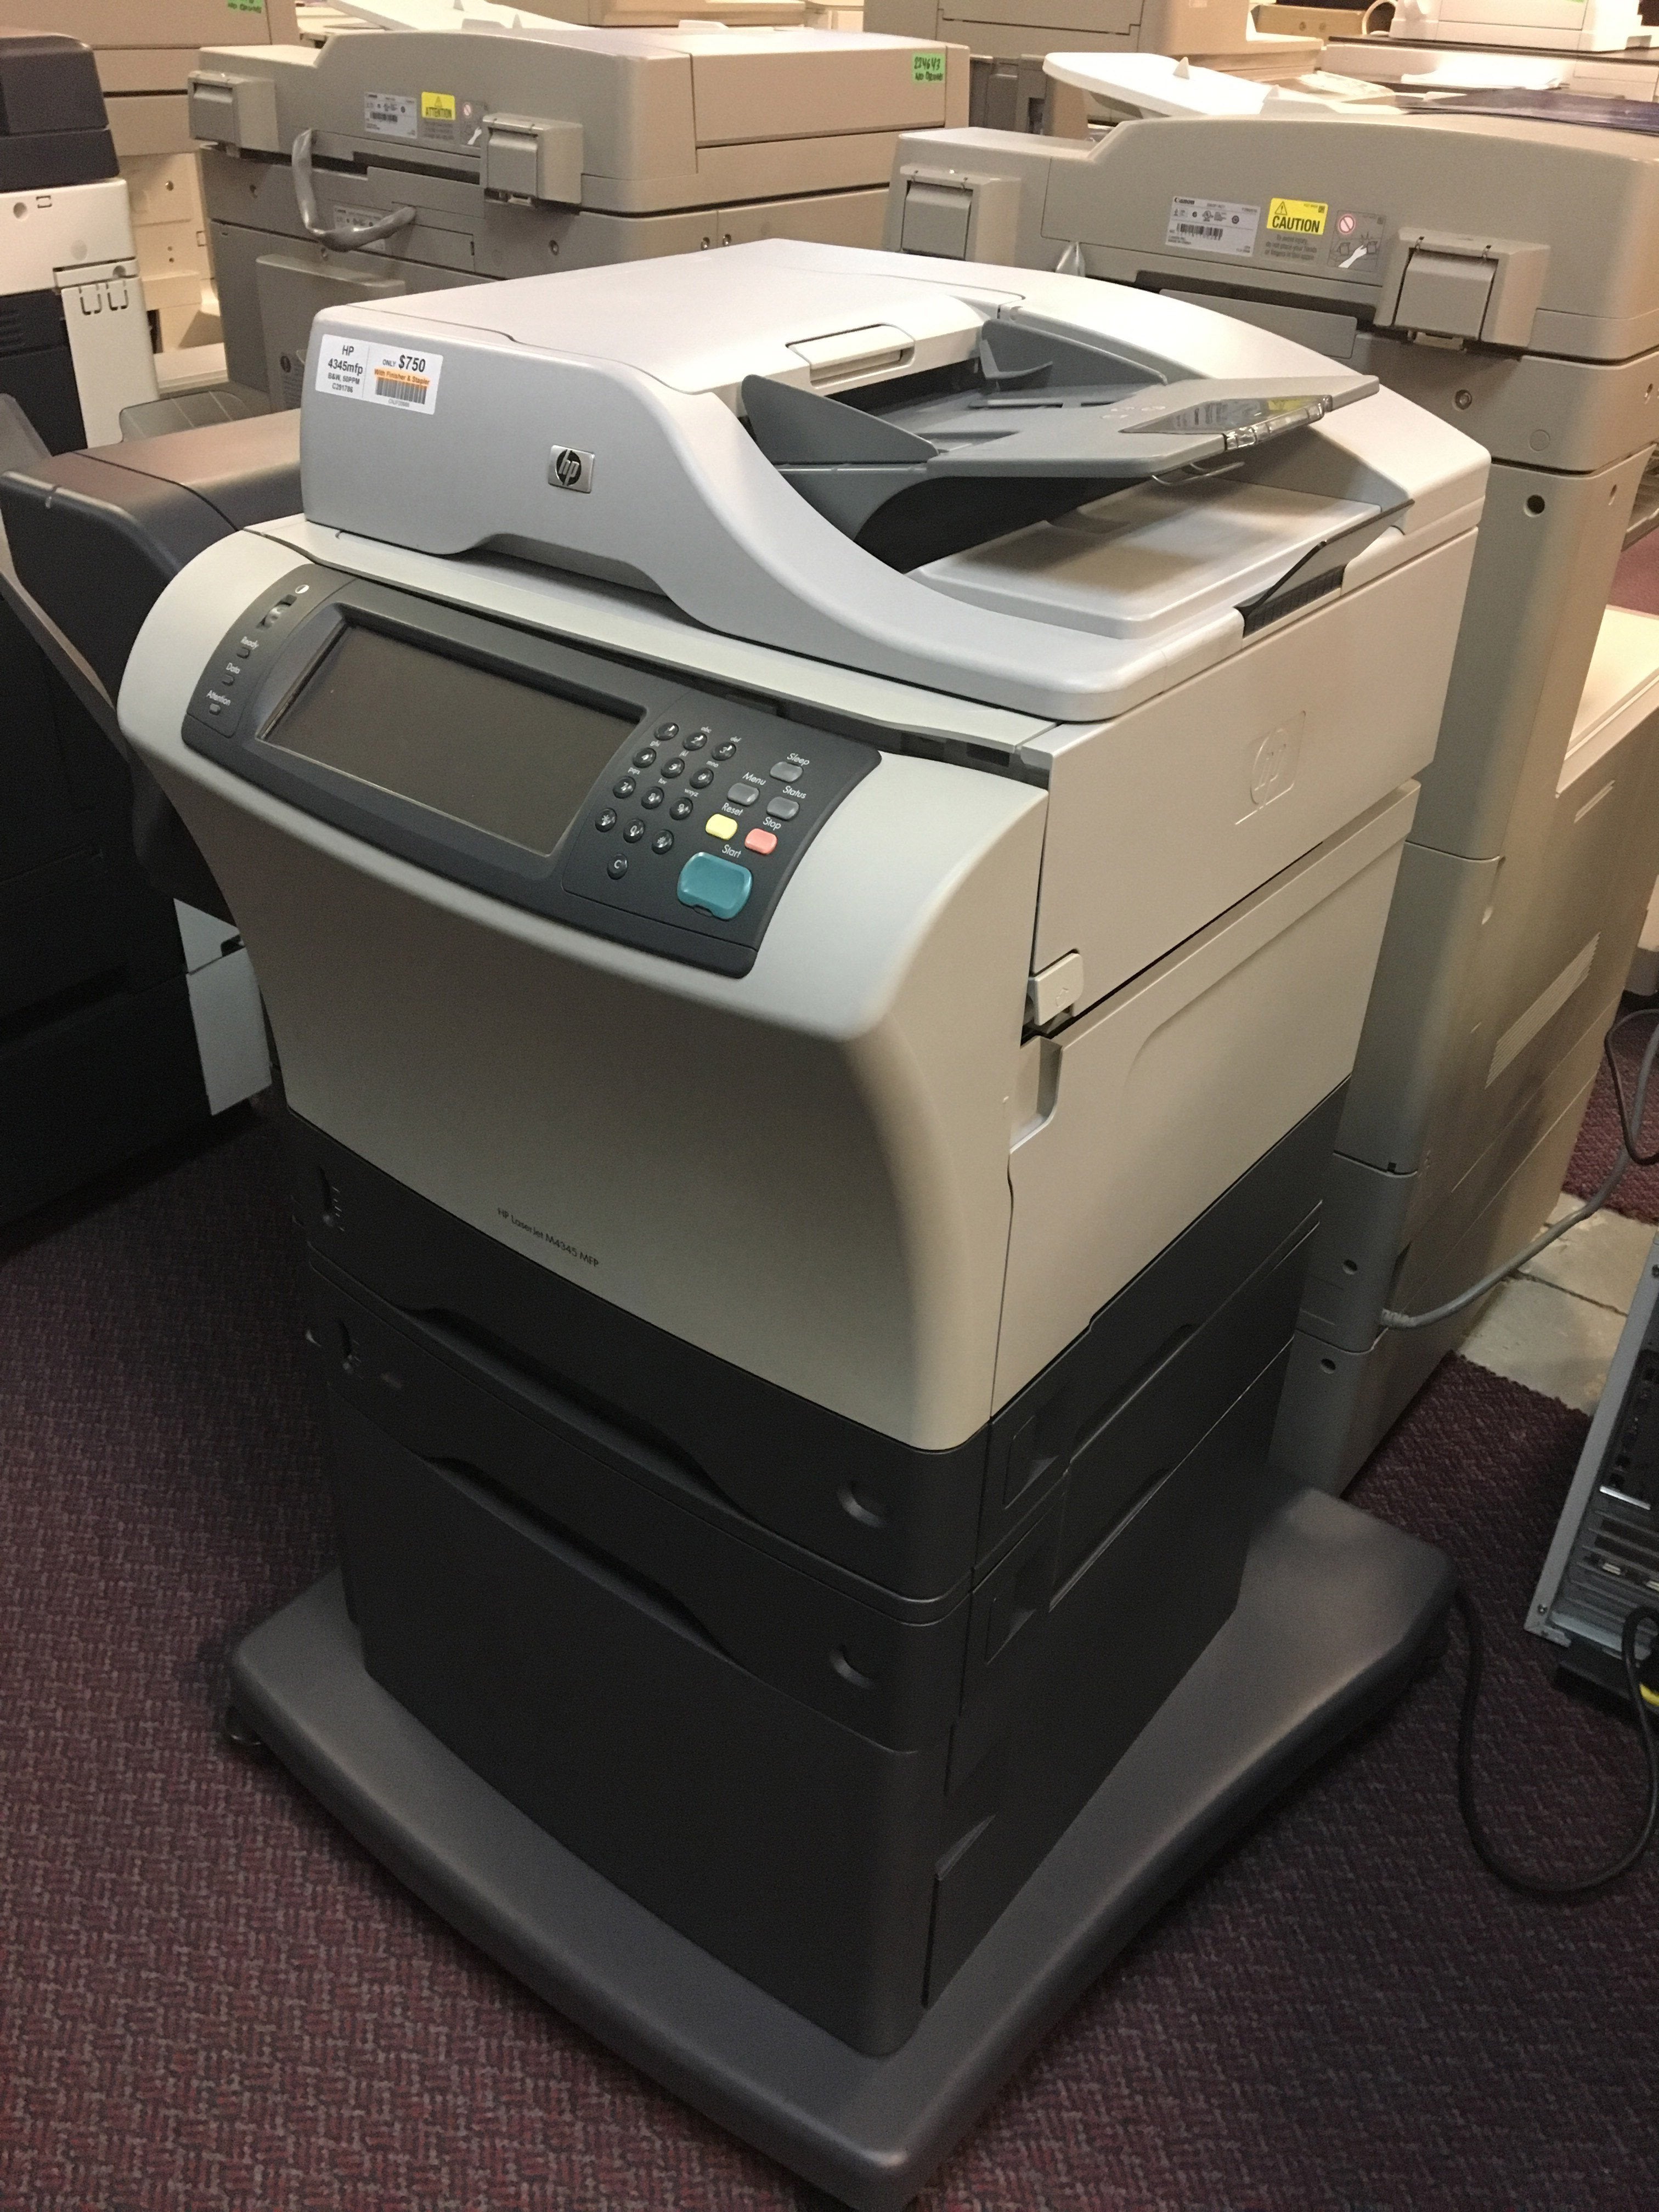 HP 4345mfp 4345 Monochrome Copier Printer Scanner with Stapler Finisher Off-Lease Photocopier Great Deal